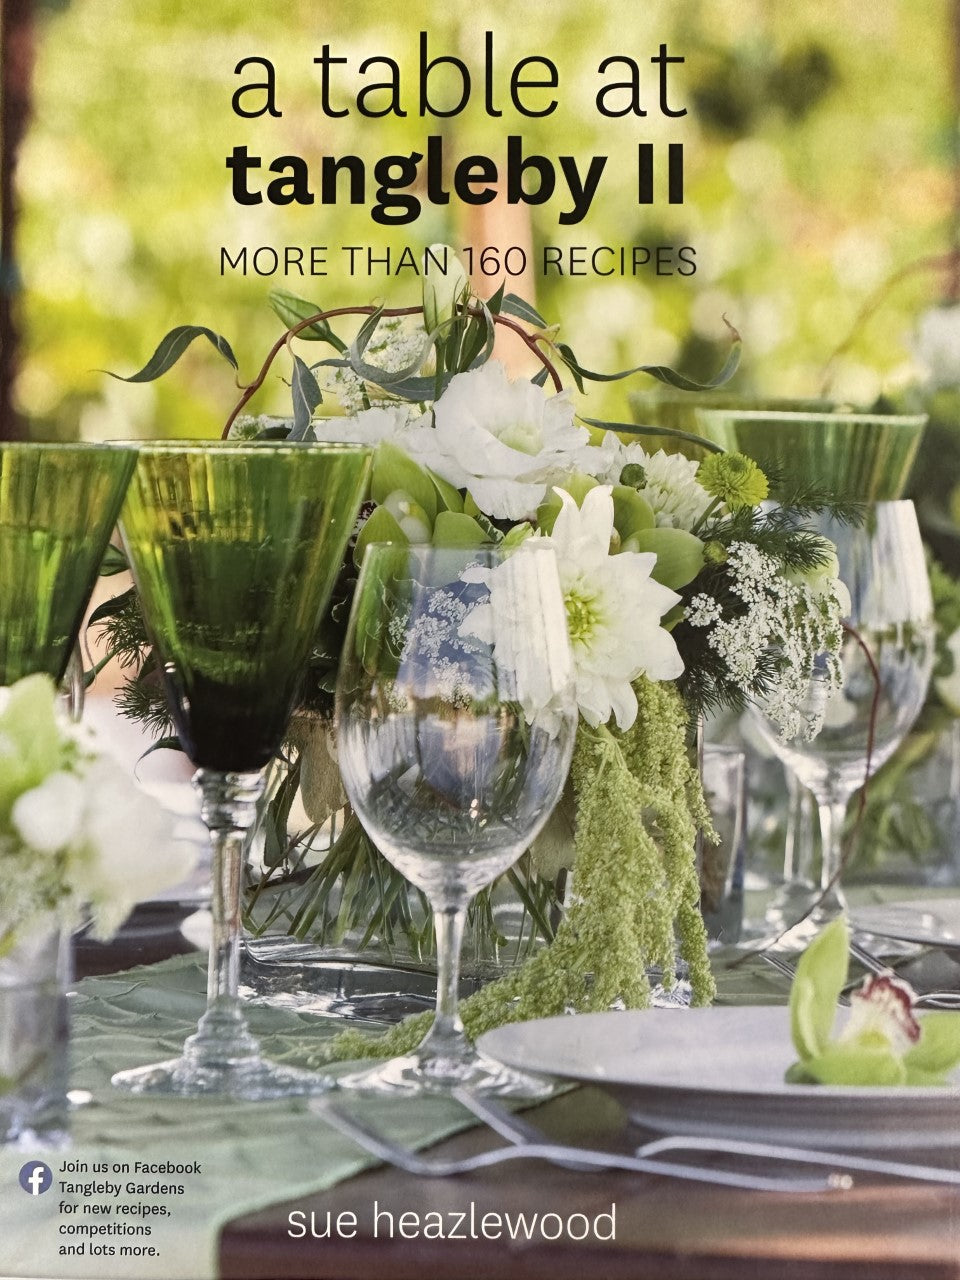 a table at Tangleby Gardens II